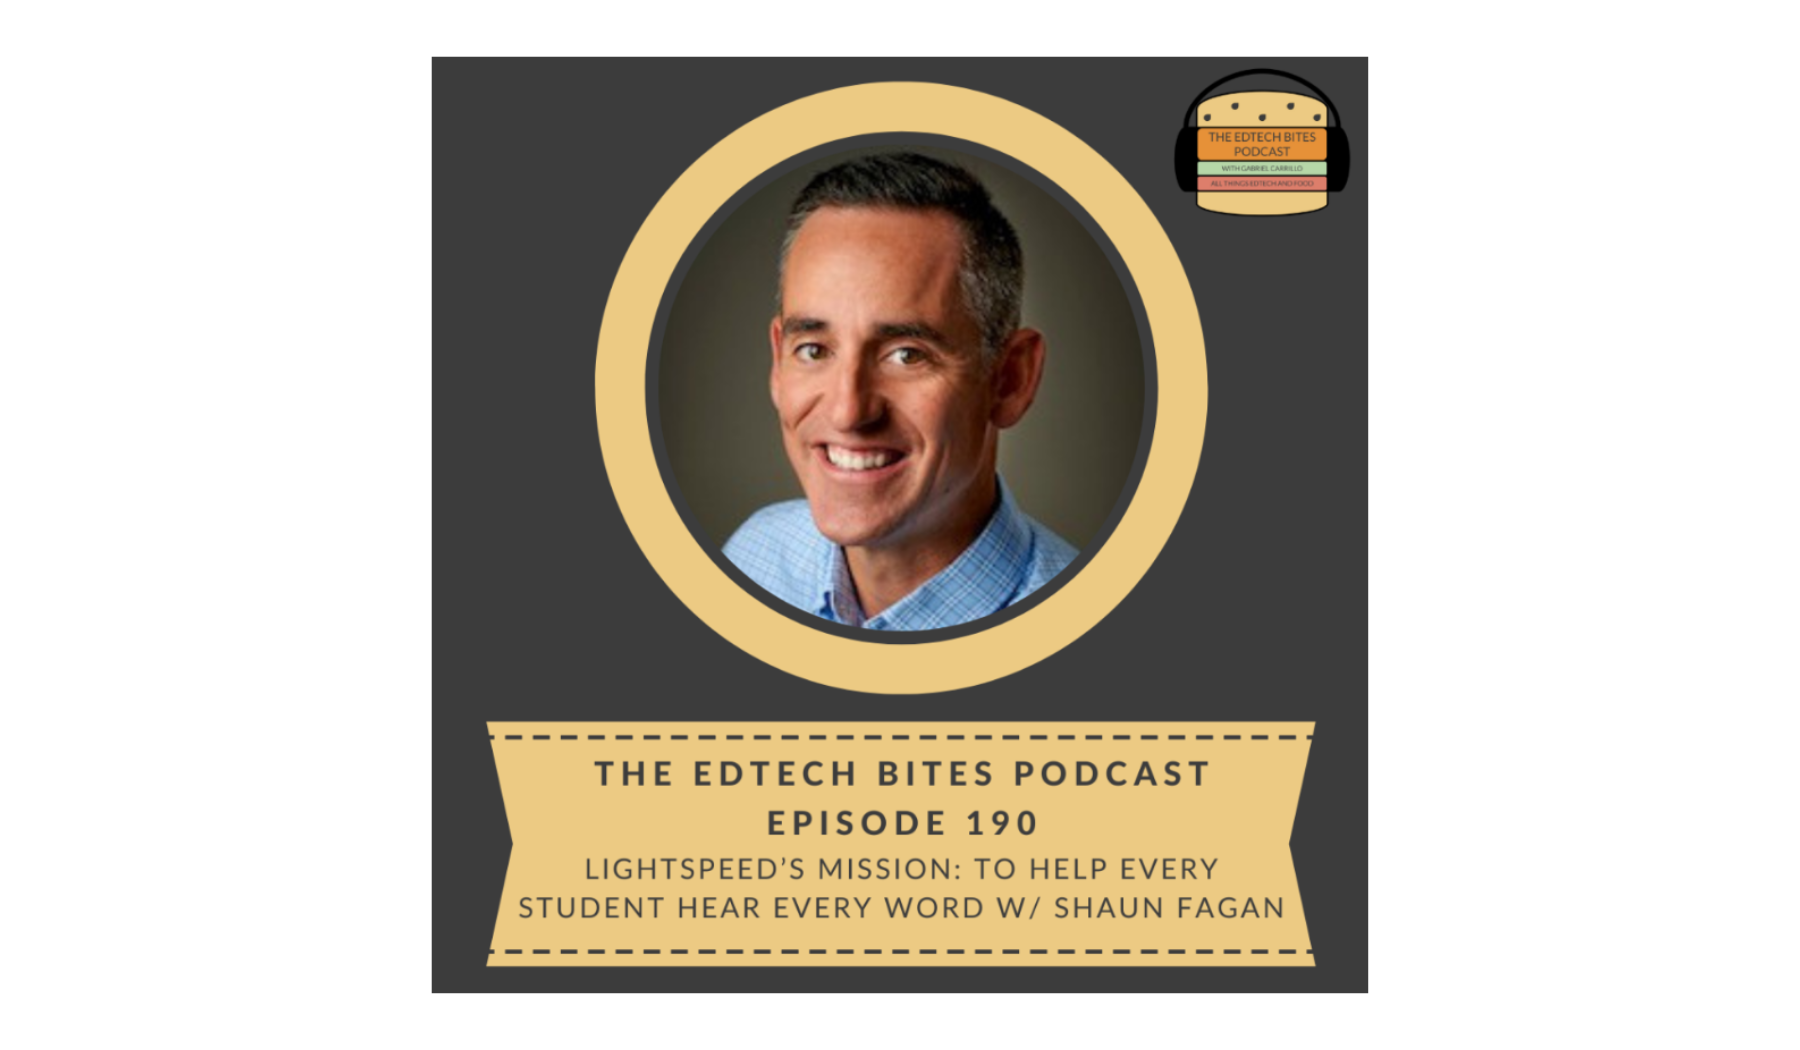 Podcast: Lightspeed’s Mission: To Help Every Student Hear Every Word W/ Shaun Fagan